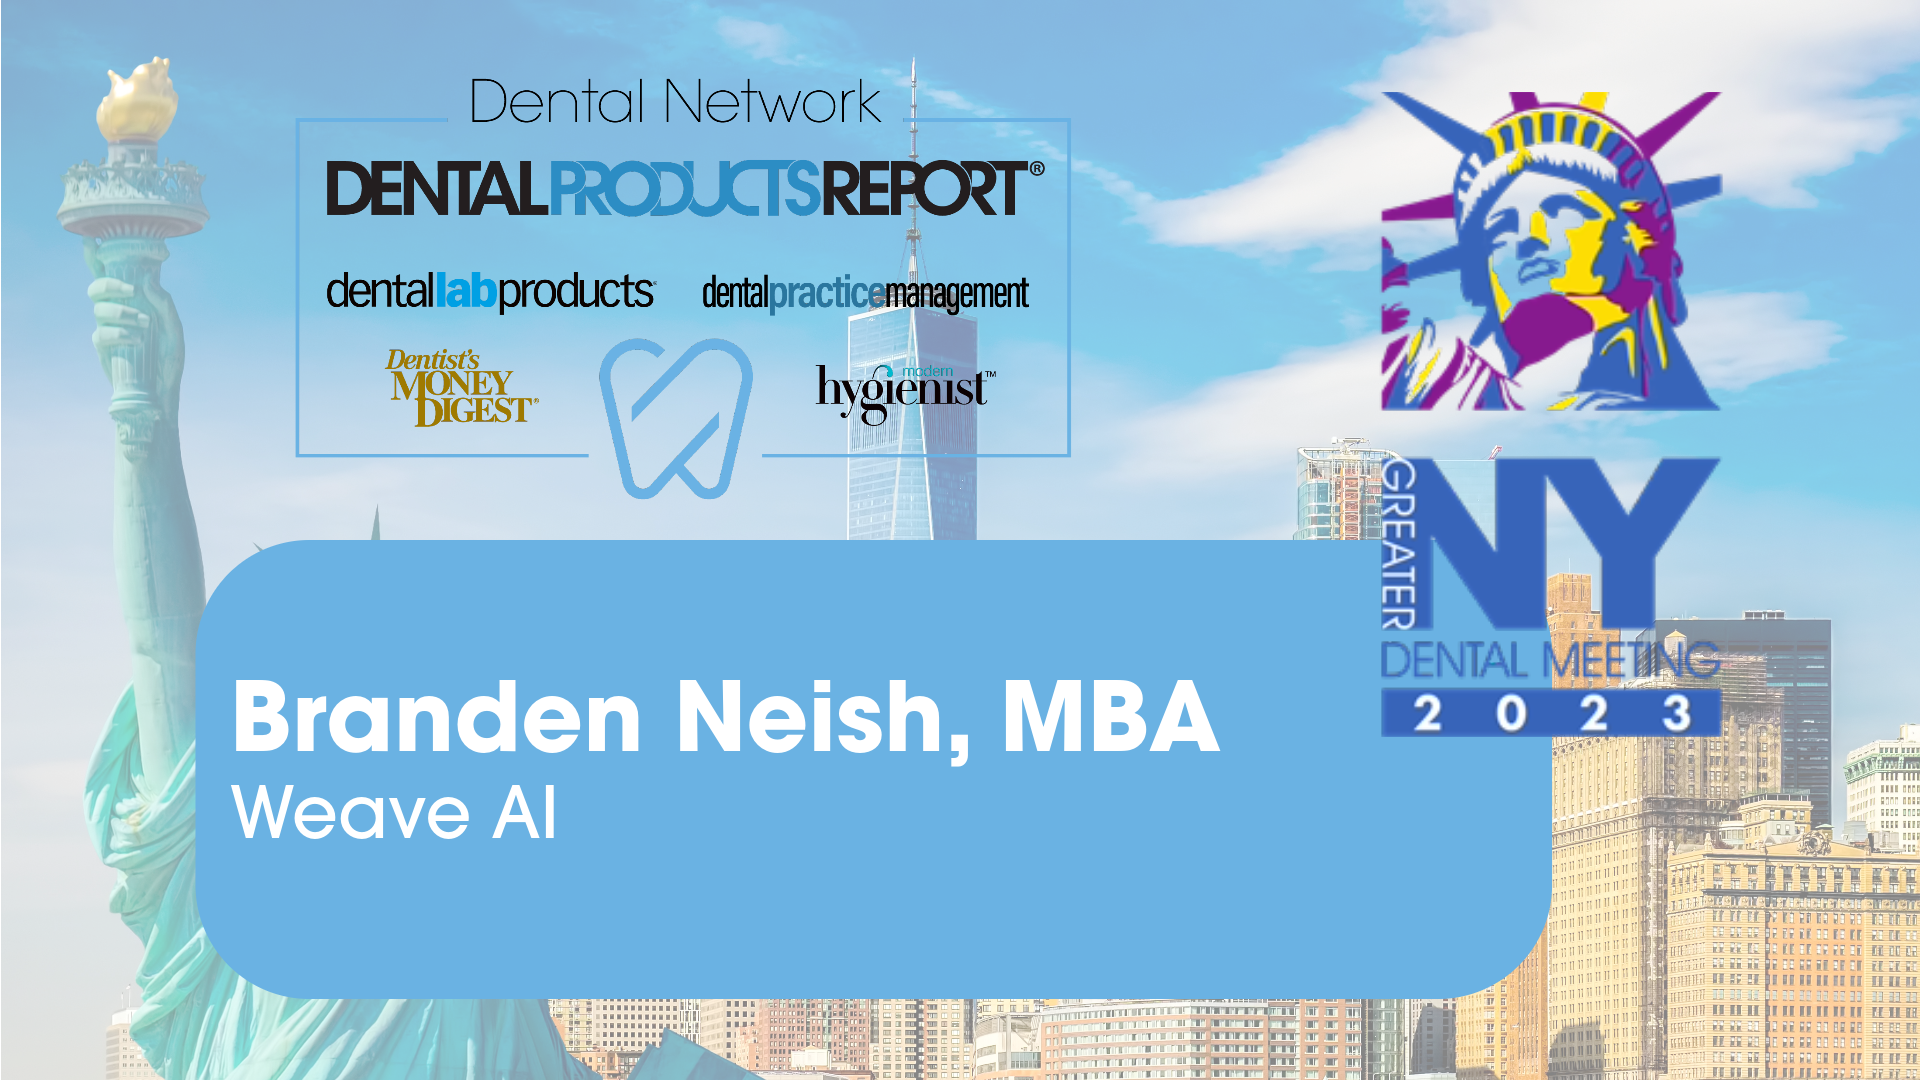 Greater New York Dental Meeting 2023 – Interview with Branden Neish, MBA